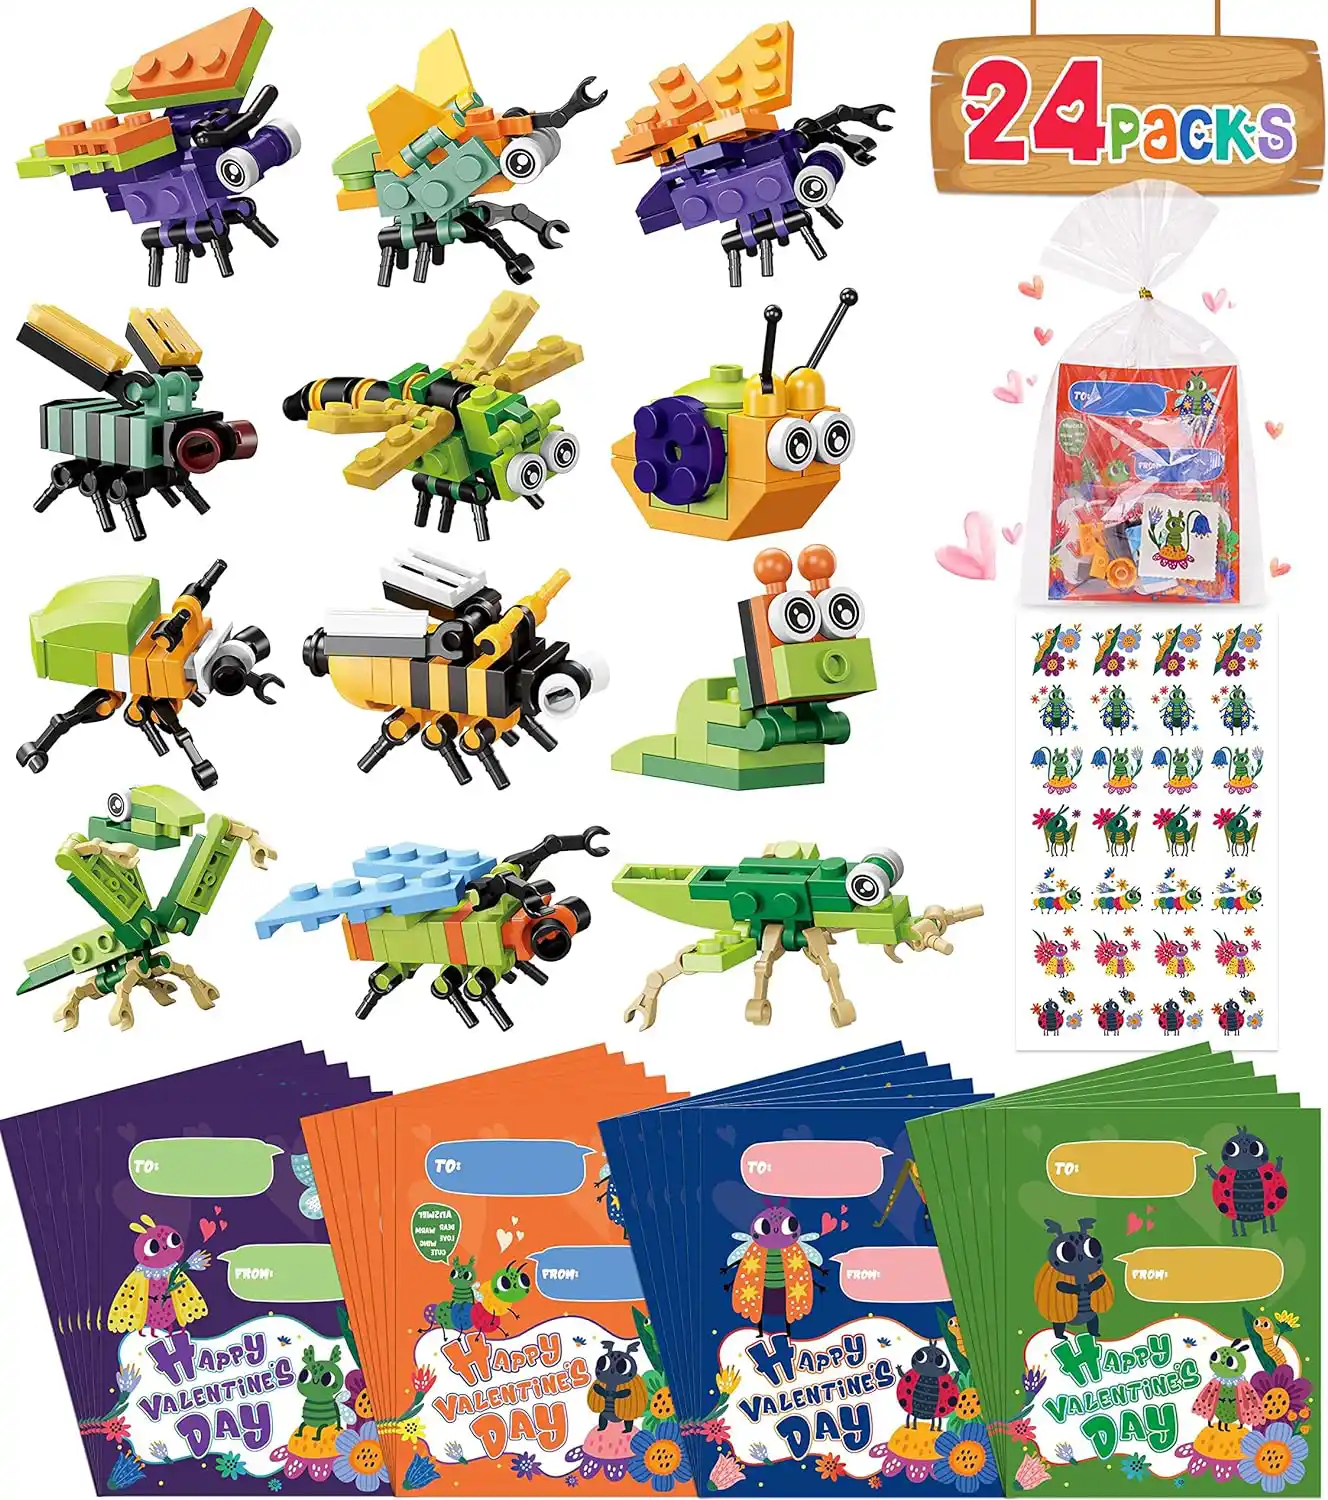 Colplay 24 Pieces of Cute Insect-Shaped Building Blocks